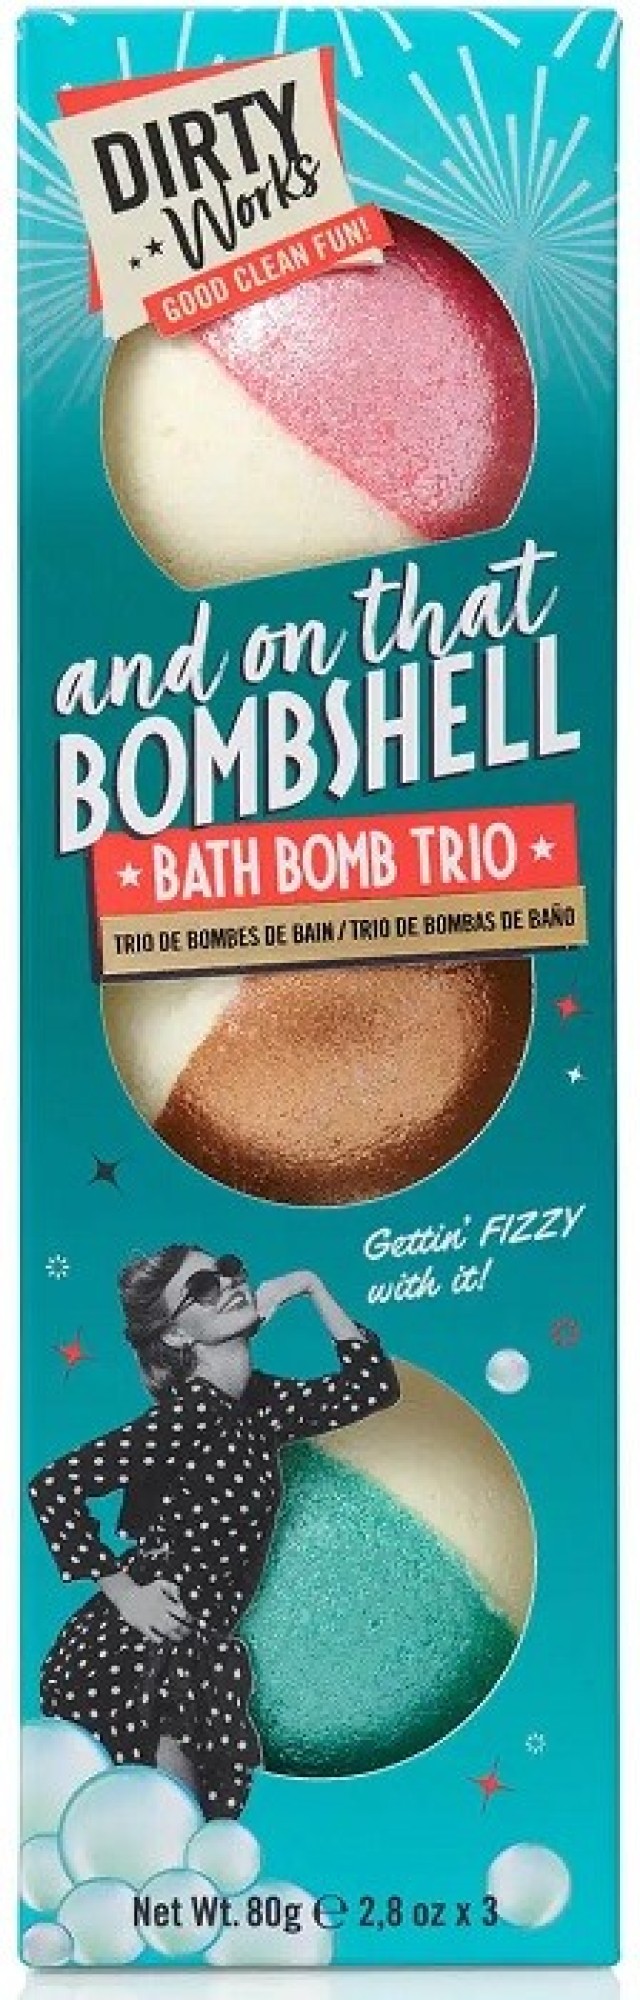 Dirty Works And On That Bombshell Bath Bomb Trio 3x80g